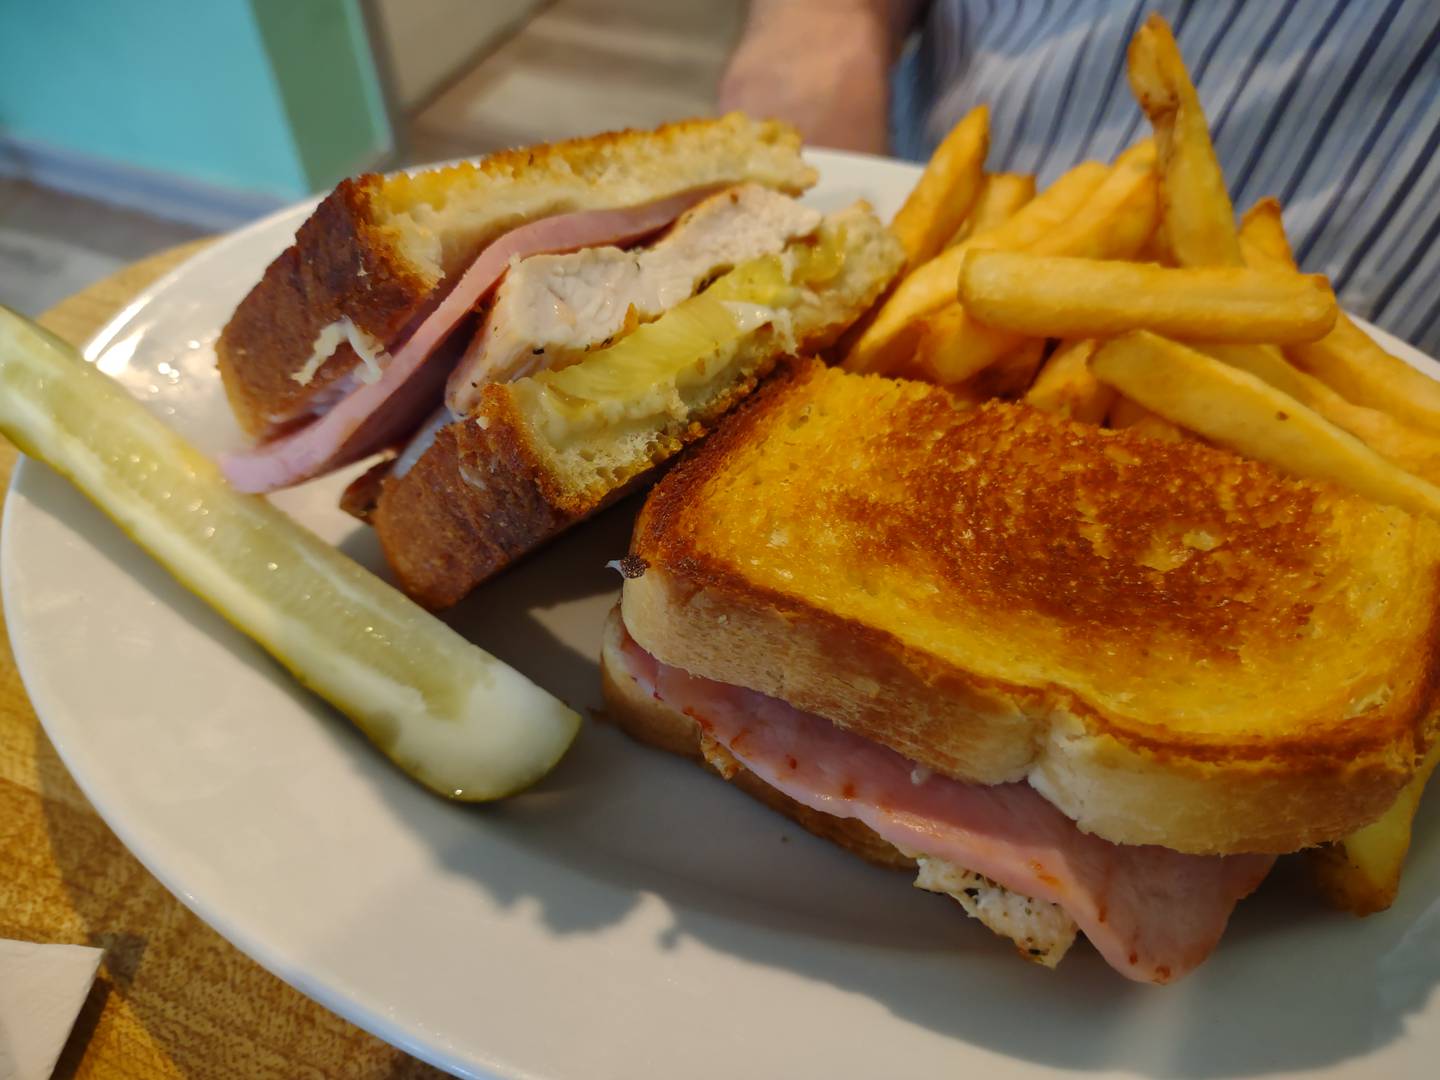 The Hawaiian chicken melt includes a seasoned chicken breast with a slice of ham, sliced pineapple and mozzarella cheese on sourdough bread.